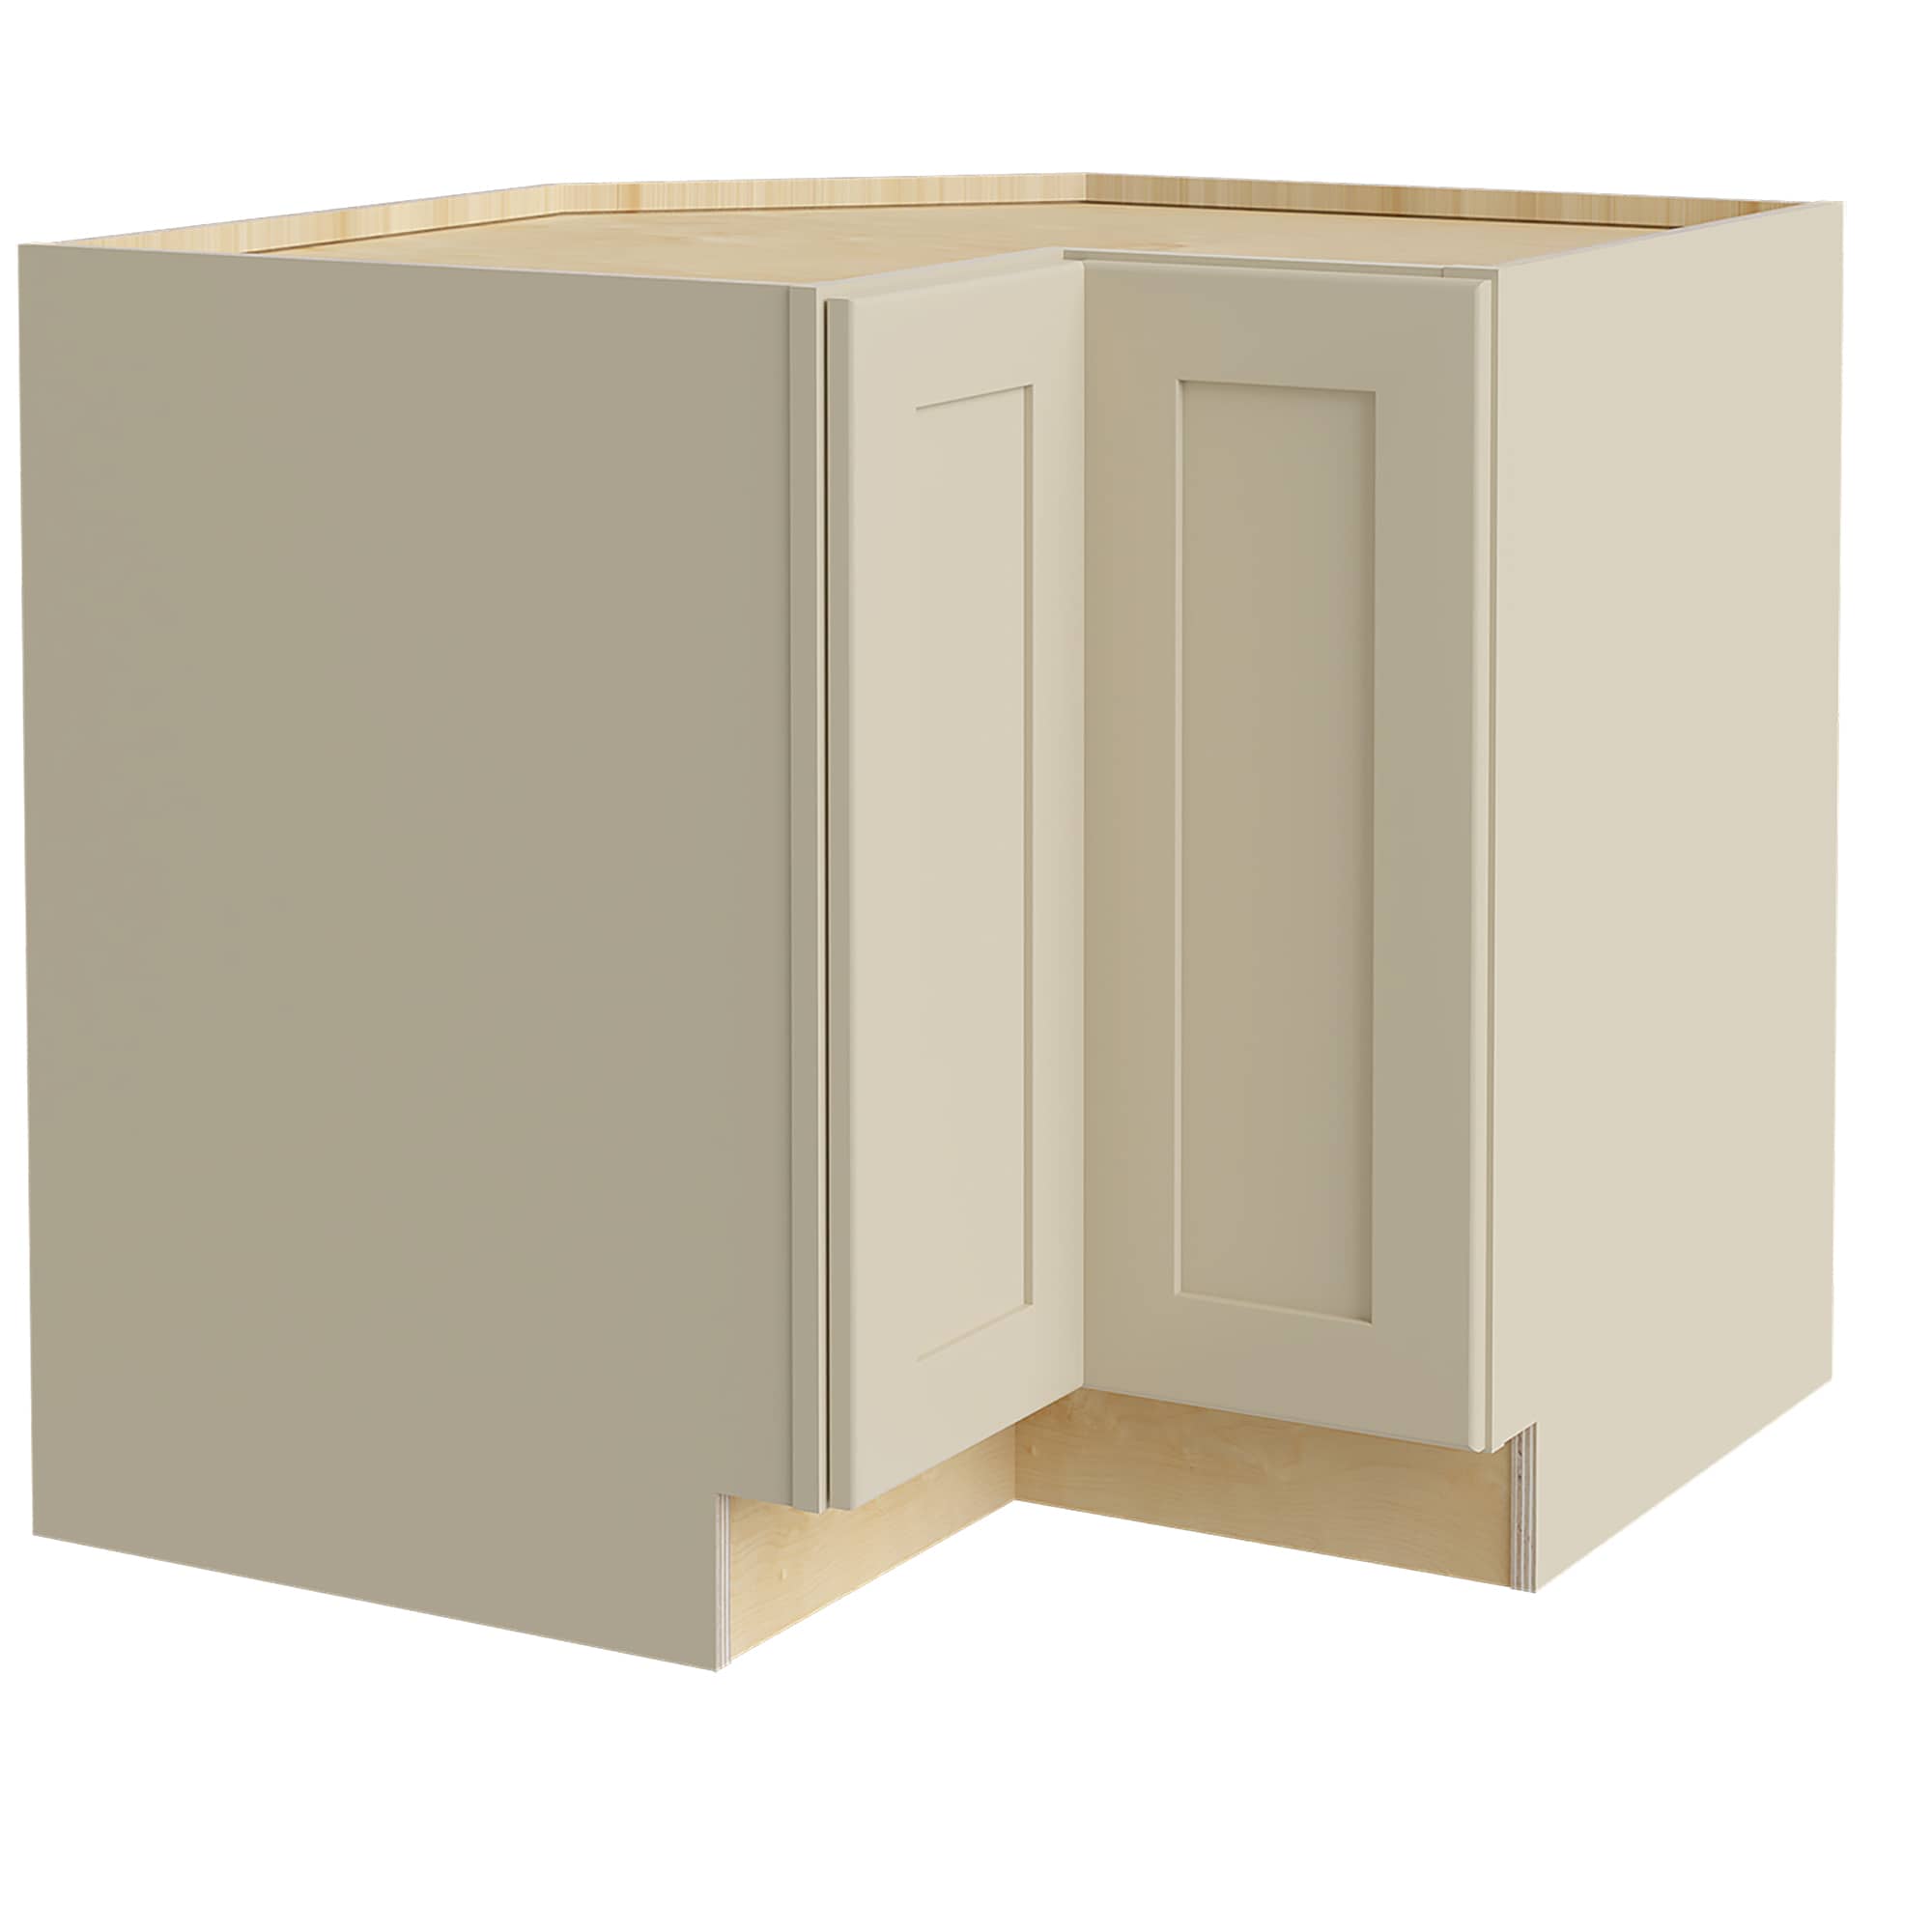 Luxxe Cabinetry 36-in W x 34.5-in H x 24-in D Norfolk Blended Cream Painted Lazy Susan Corner Base Fully Assembled Semi-custom Cabinet in Off-White